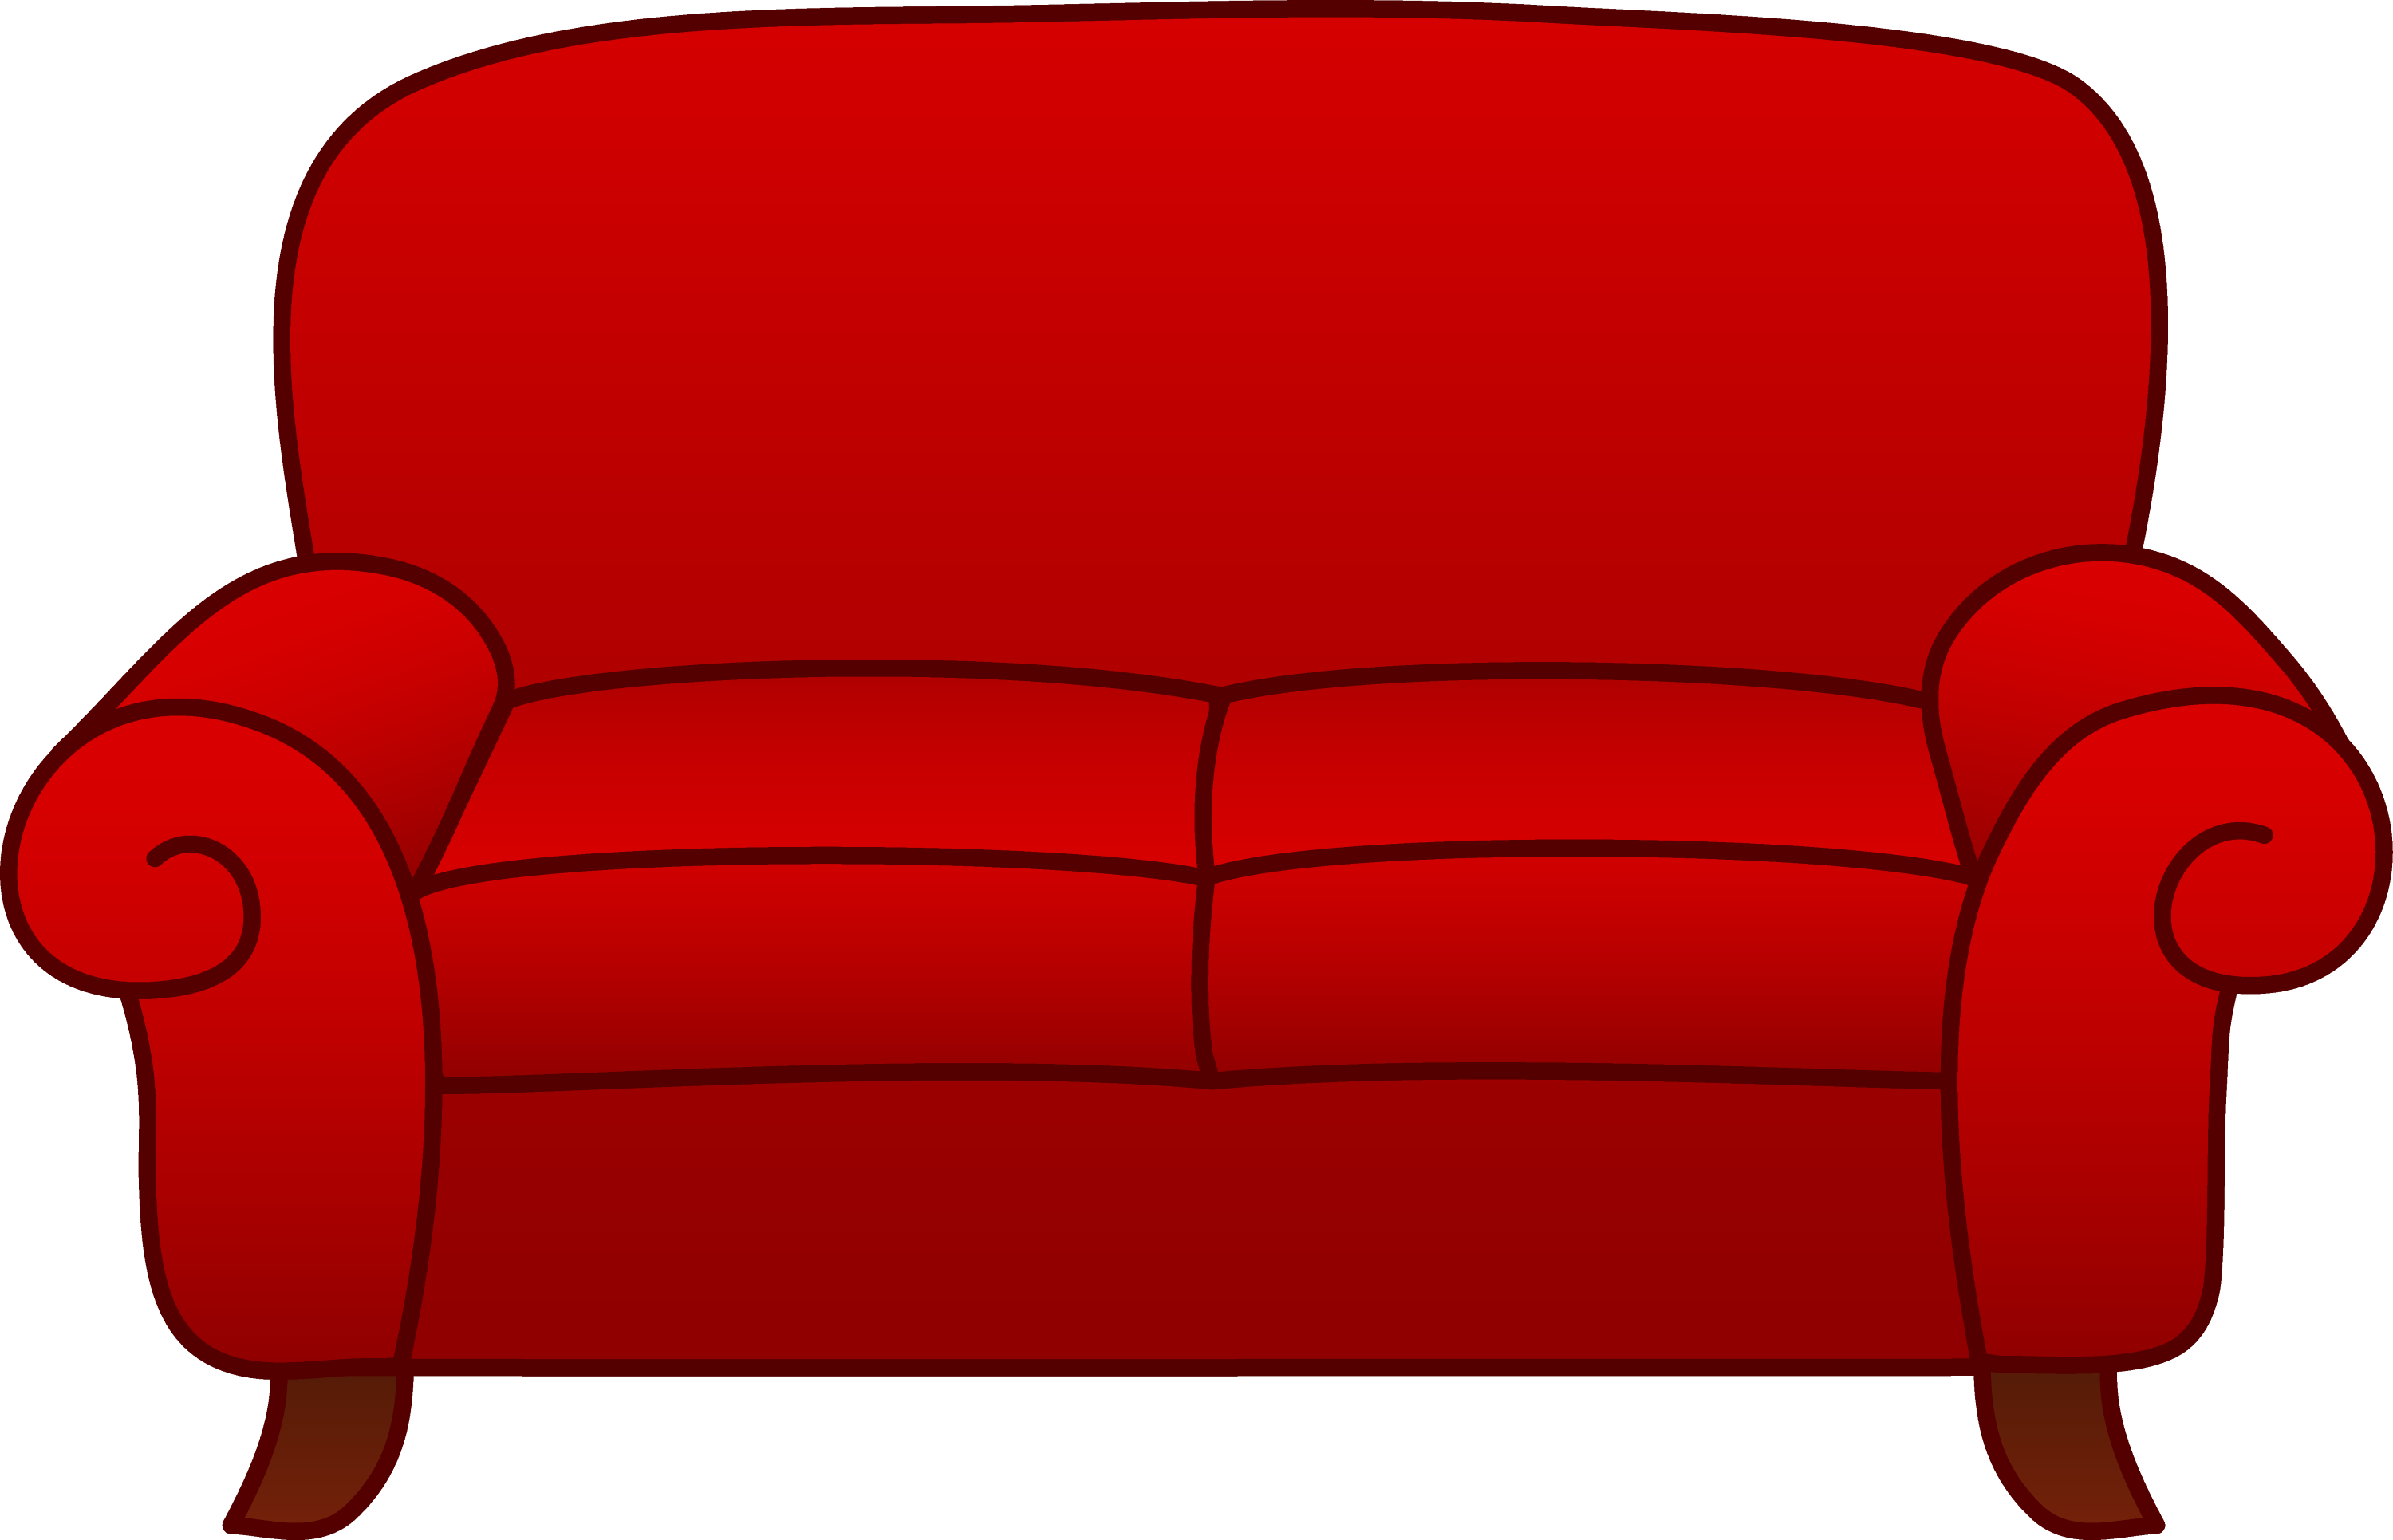 clipart of furniture - photo #40